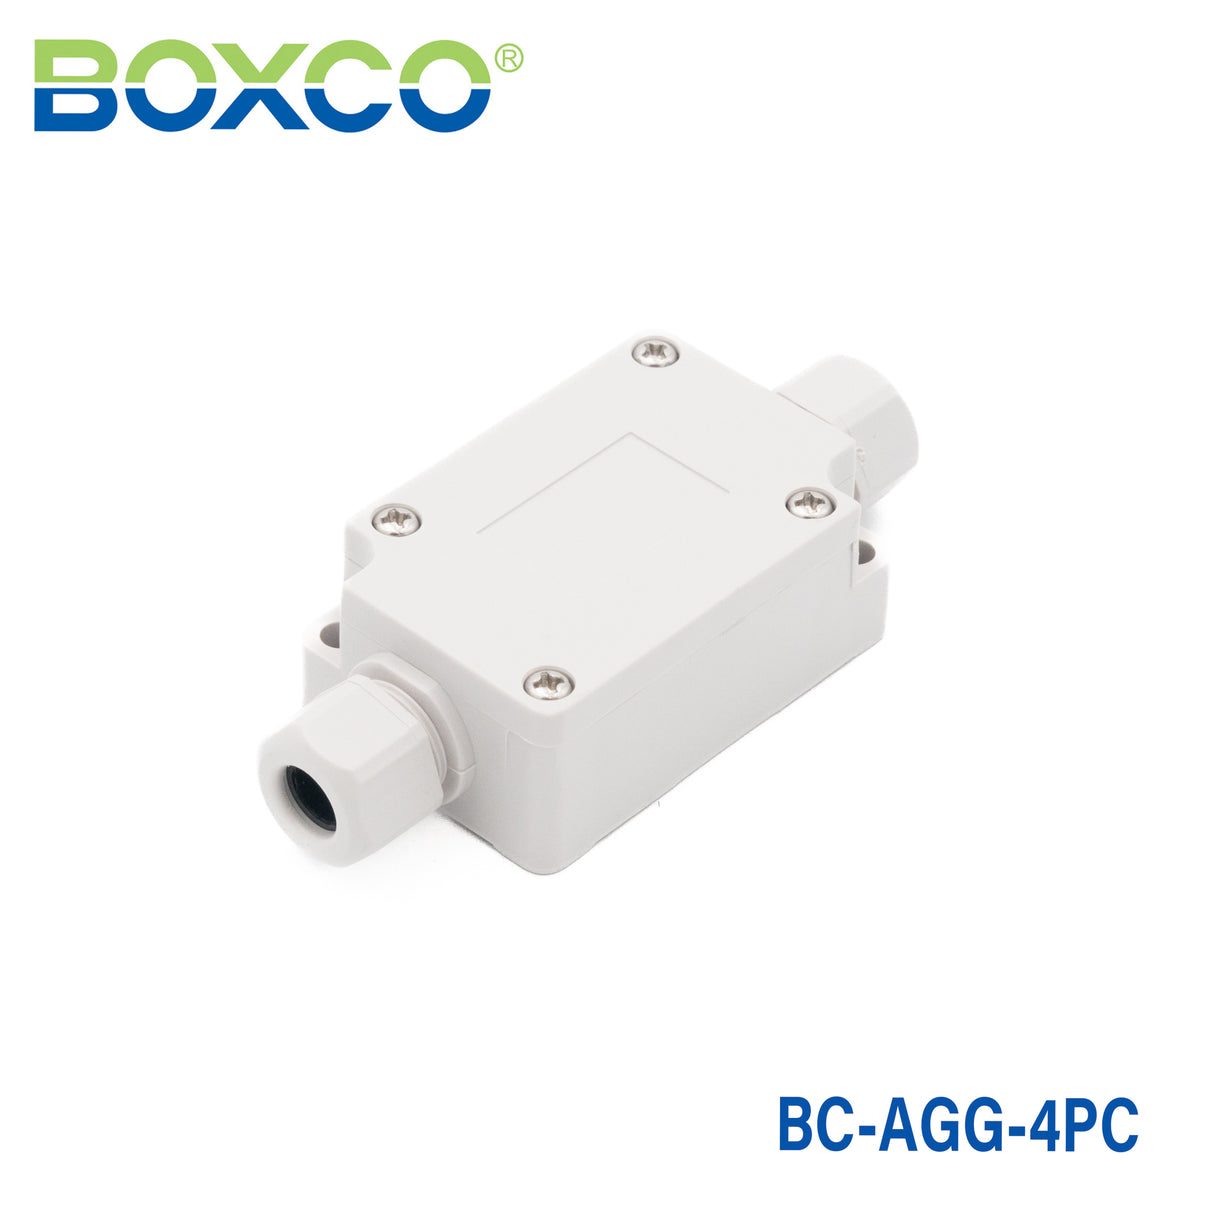 Boxco Terminal Box 4-pole with Waterproof Connector 40x60x24mm, IP67, IK08, ABS, Grey Cover